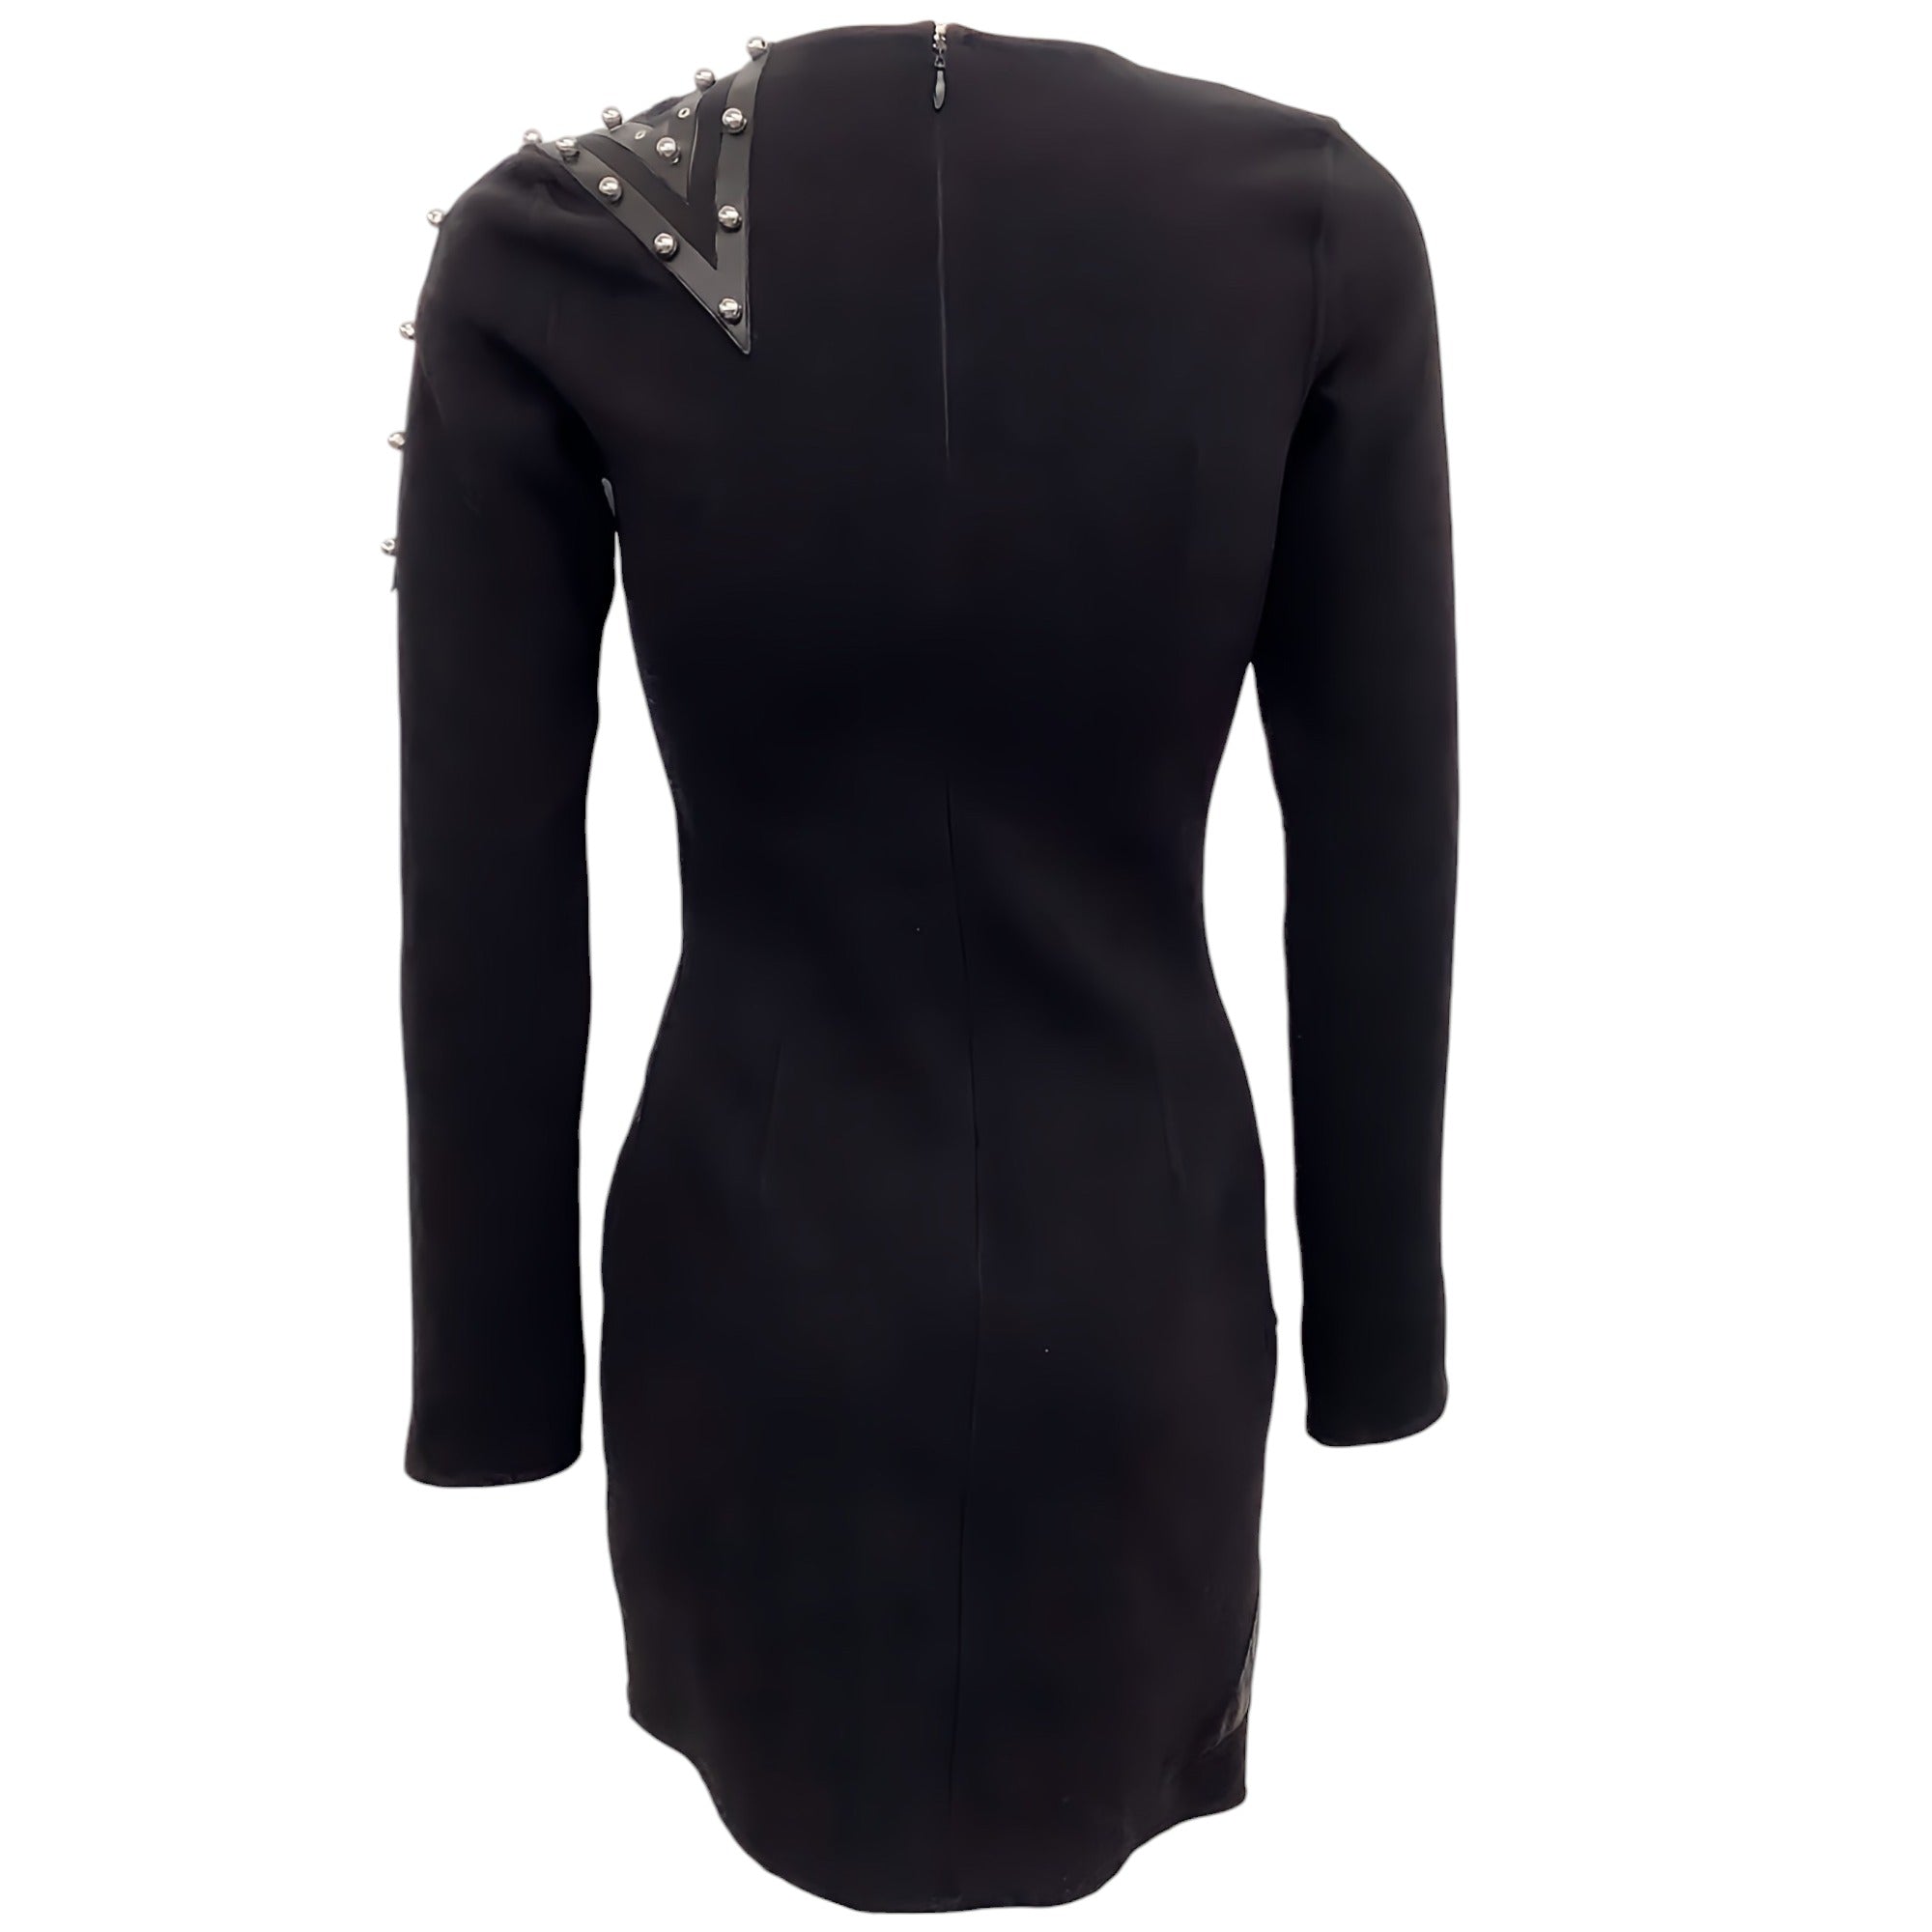 Anthony Vaccarello Black Body Con Dress with Leather Stars